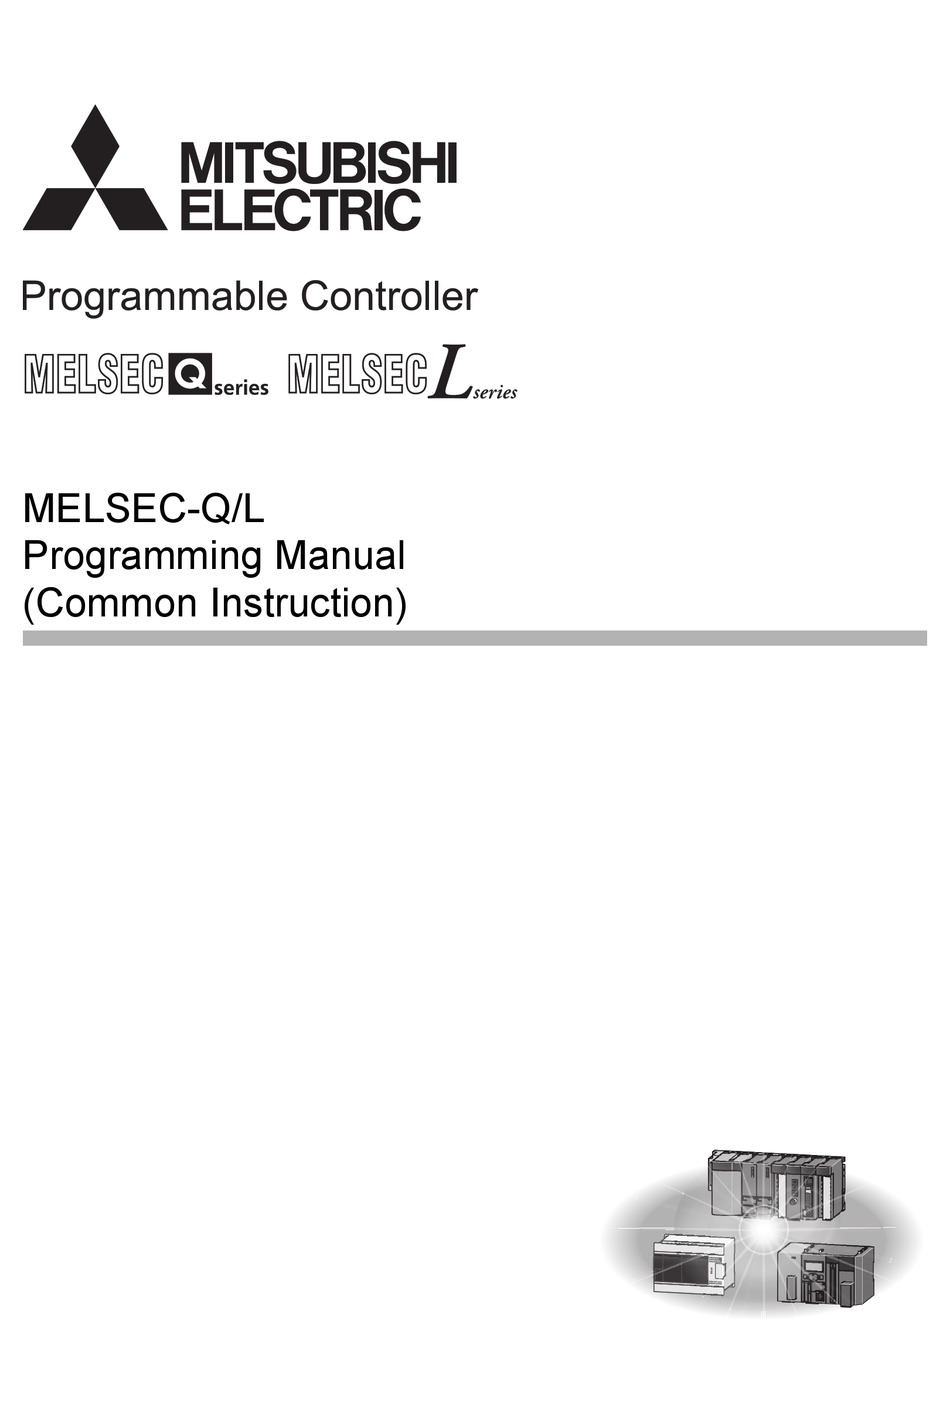 gx works 2 structured programming manual